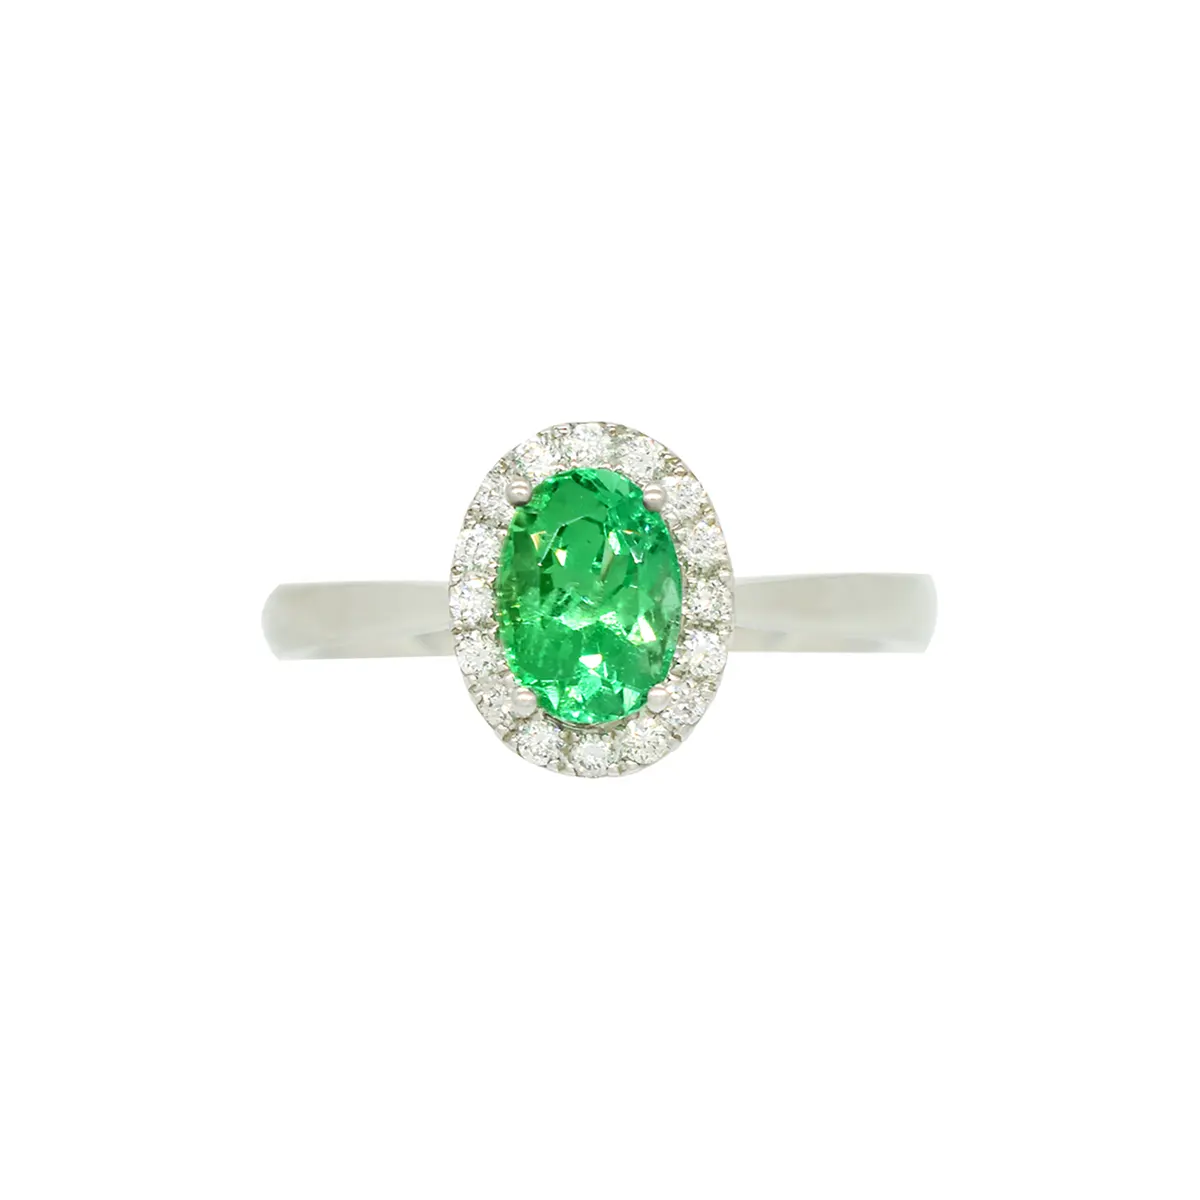 18k-white-gold-cluster-emerald-ring-in-diamond-halo-with-stunning-oval-shape-emerald